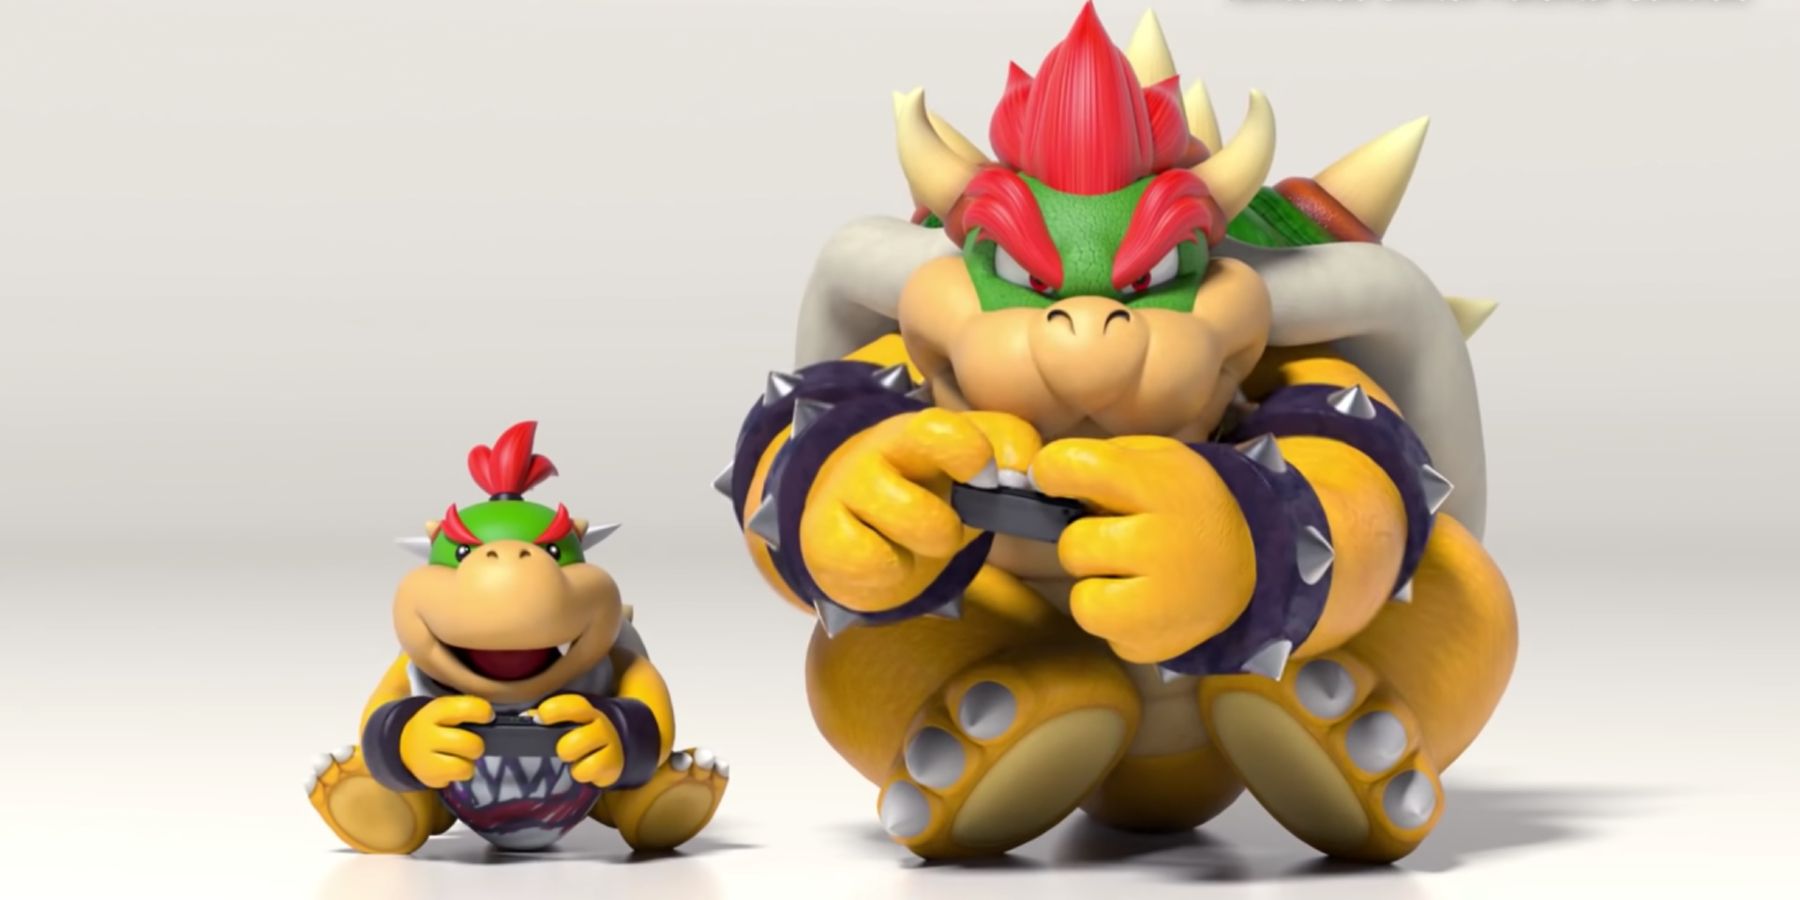 What's your theory about the Birth of Bowser.Jr? Since Mario Sunshine  disconfirms the possibility of him being Peach's son. My theory is that  Bowser is asexual like the Yoshis and had Jr